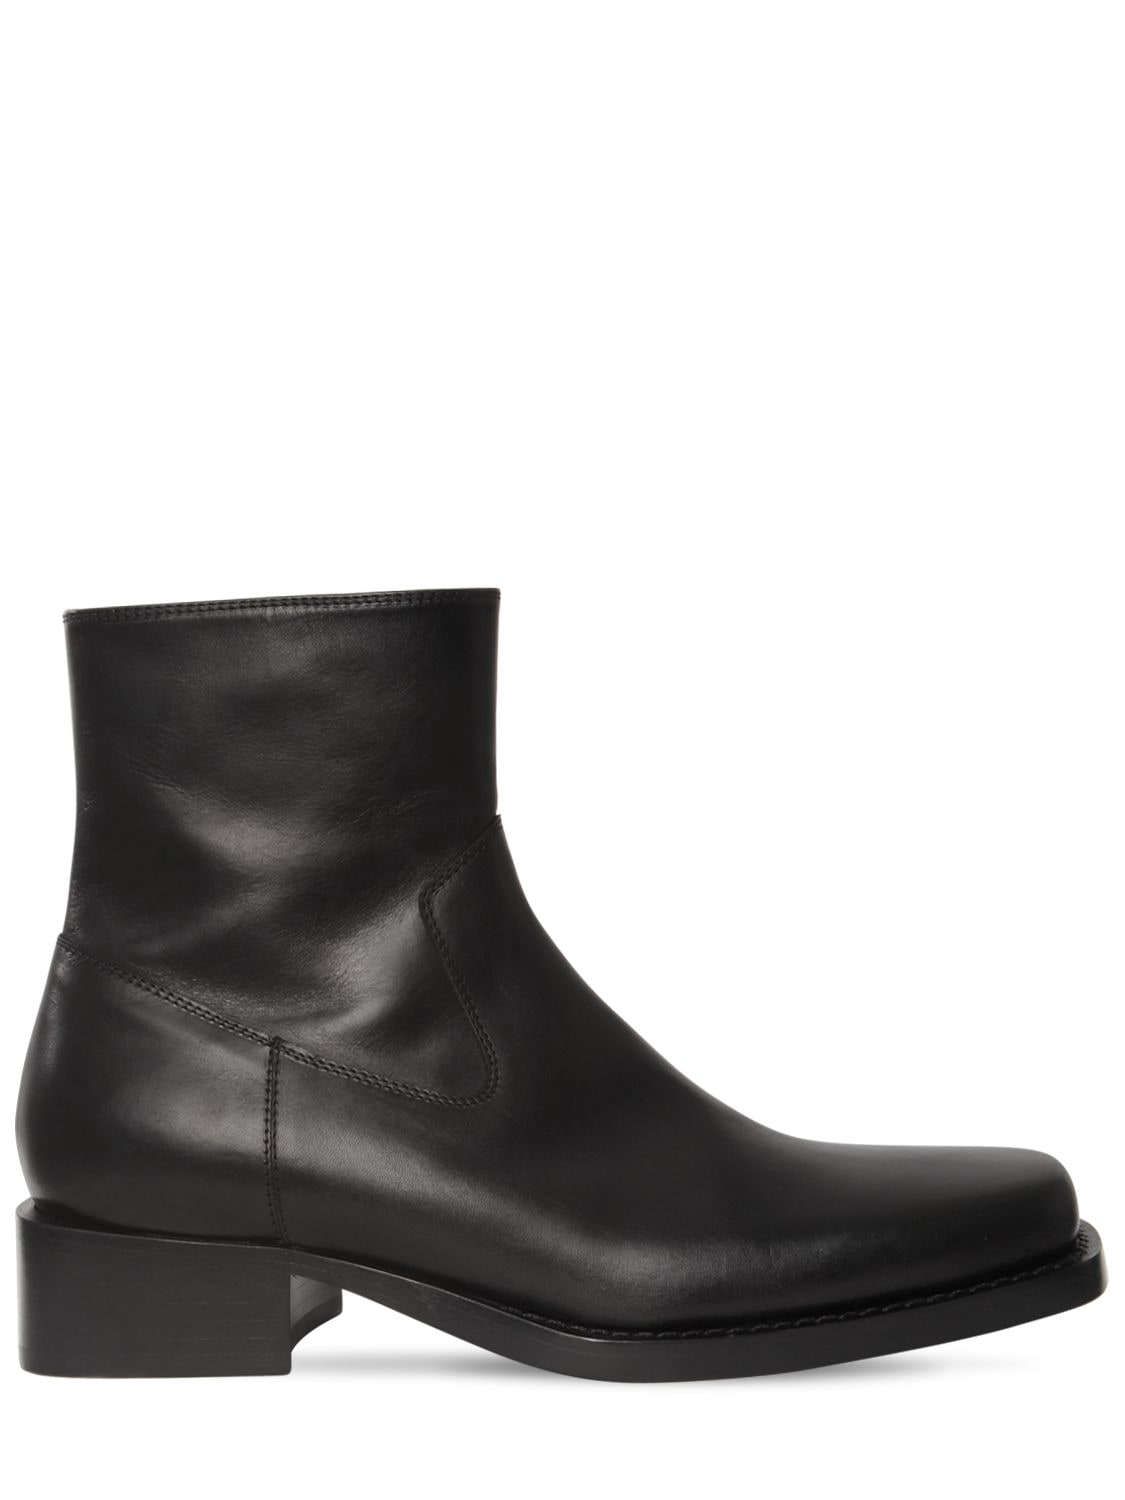 ANN DEMEULEMEESTER 45MM LEATHER BOOTS,72IA5I002-MDK50